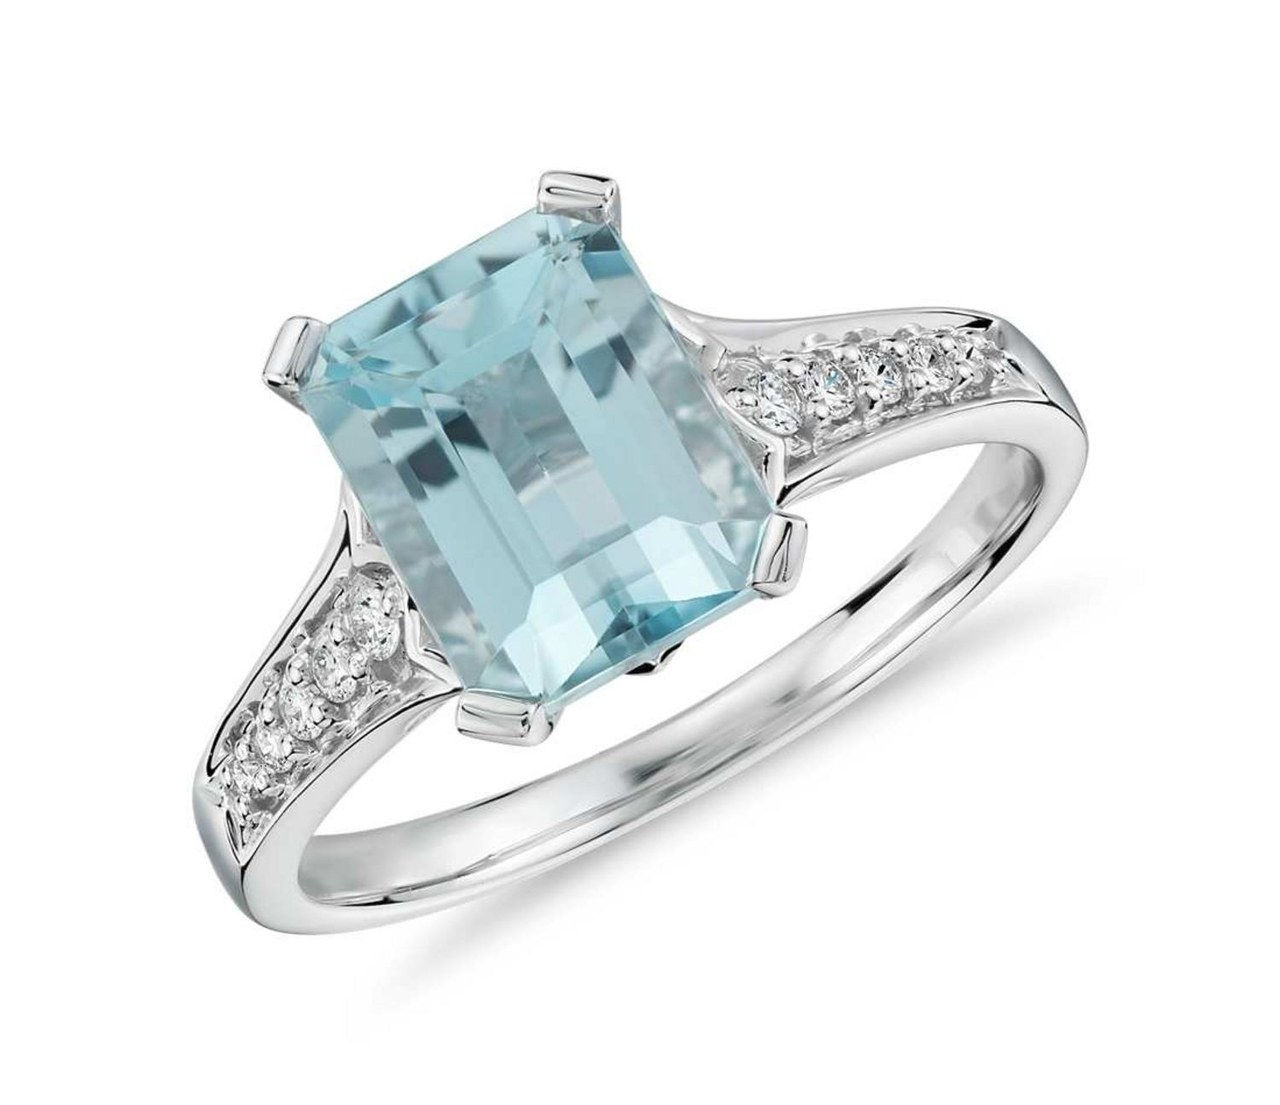 11 affordable engagement rings under 1000 1116 courtesy